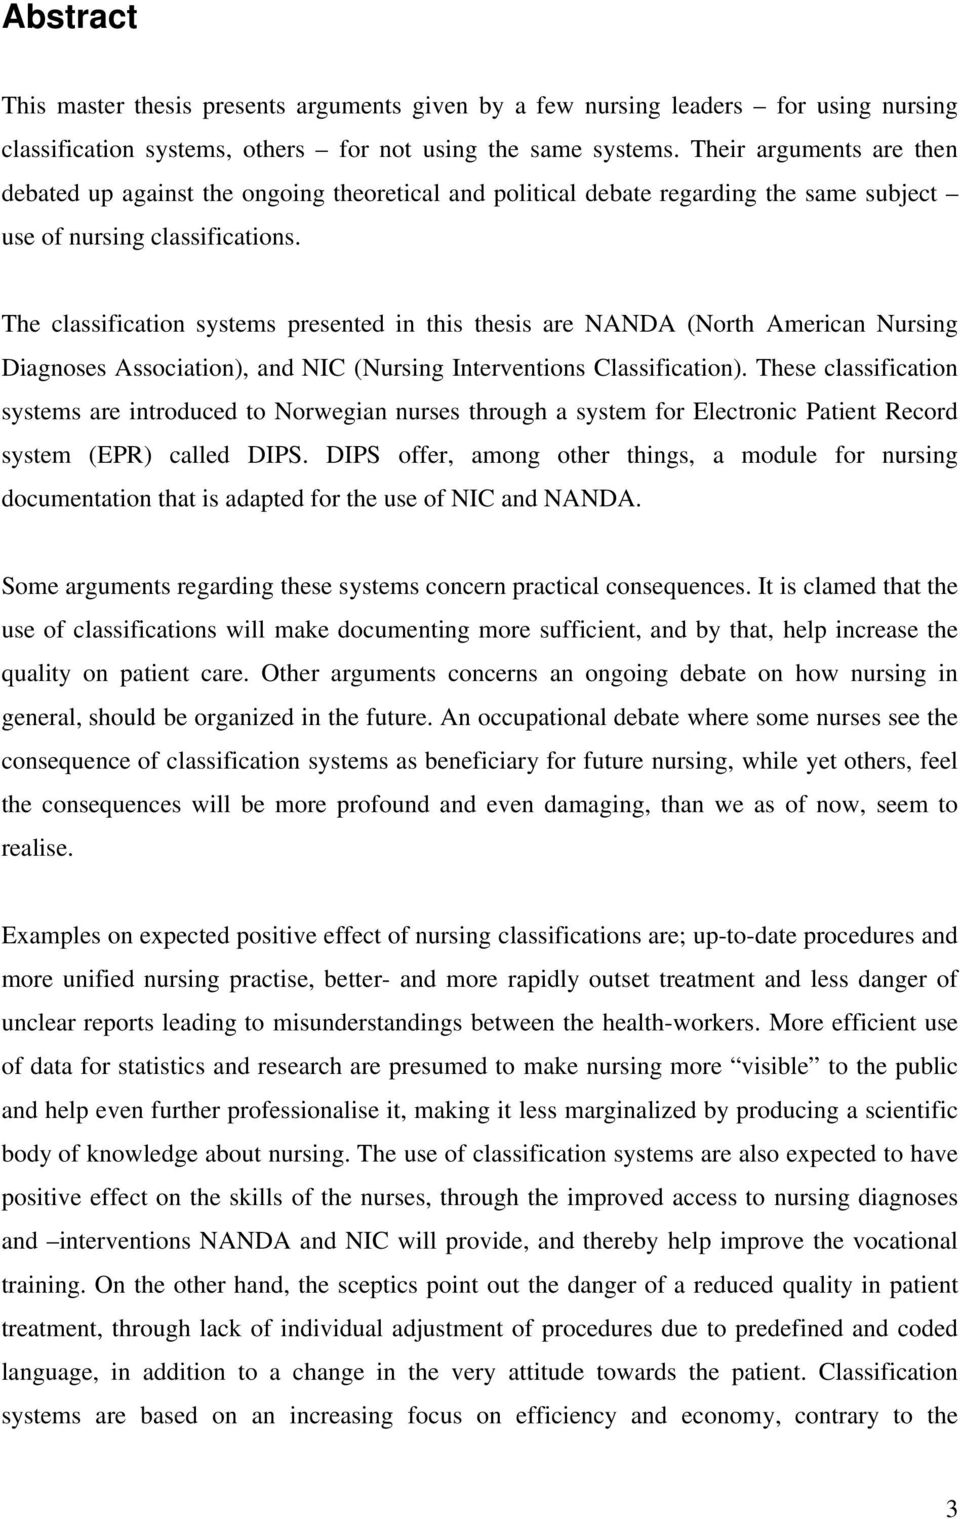 The classification systems presented in this thesis are NANDA (North American Nursing Diagnoses Association), and NIC (Nursing Interventions Classification).